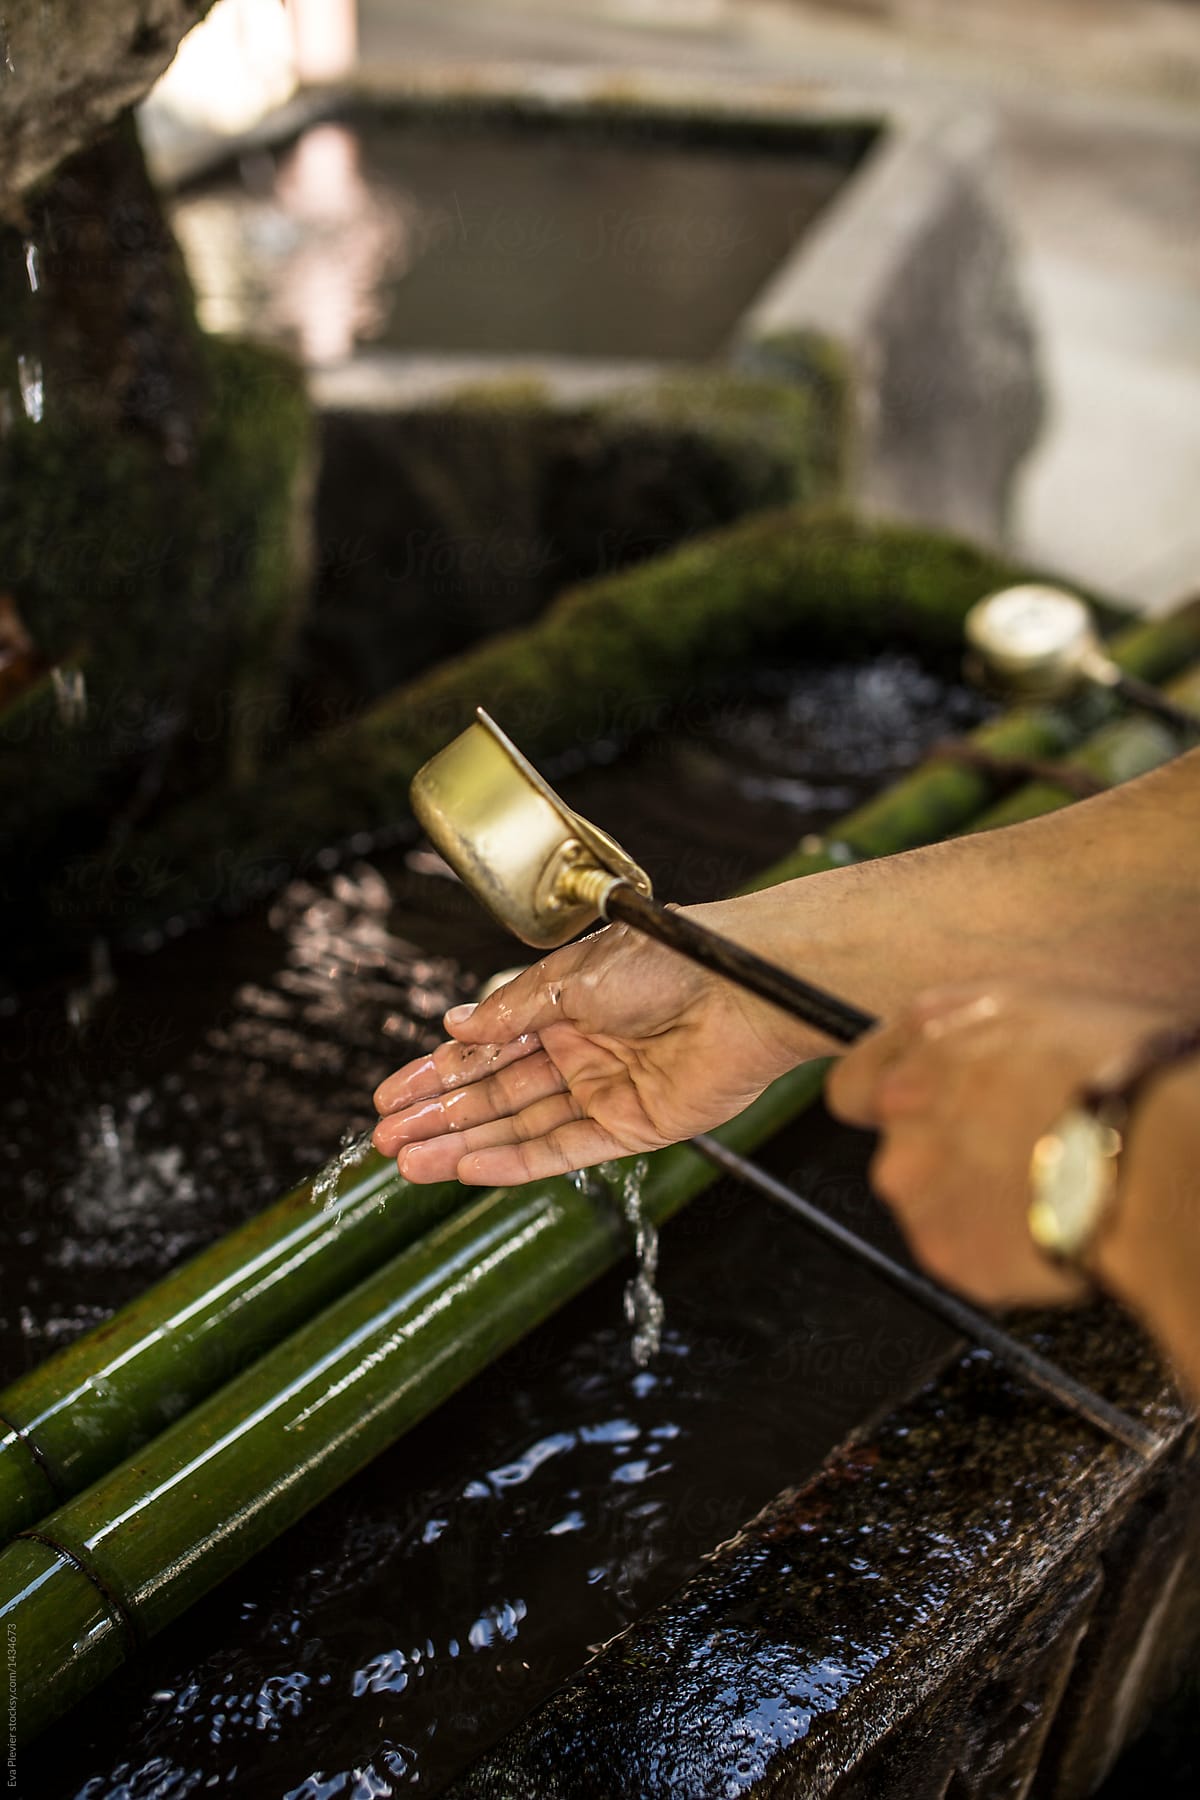 Man cleaning his hands before entering a temple.